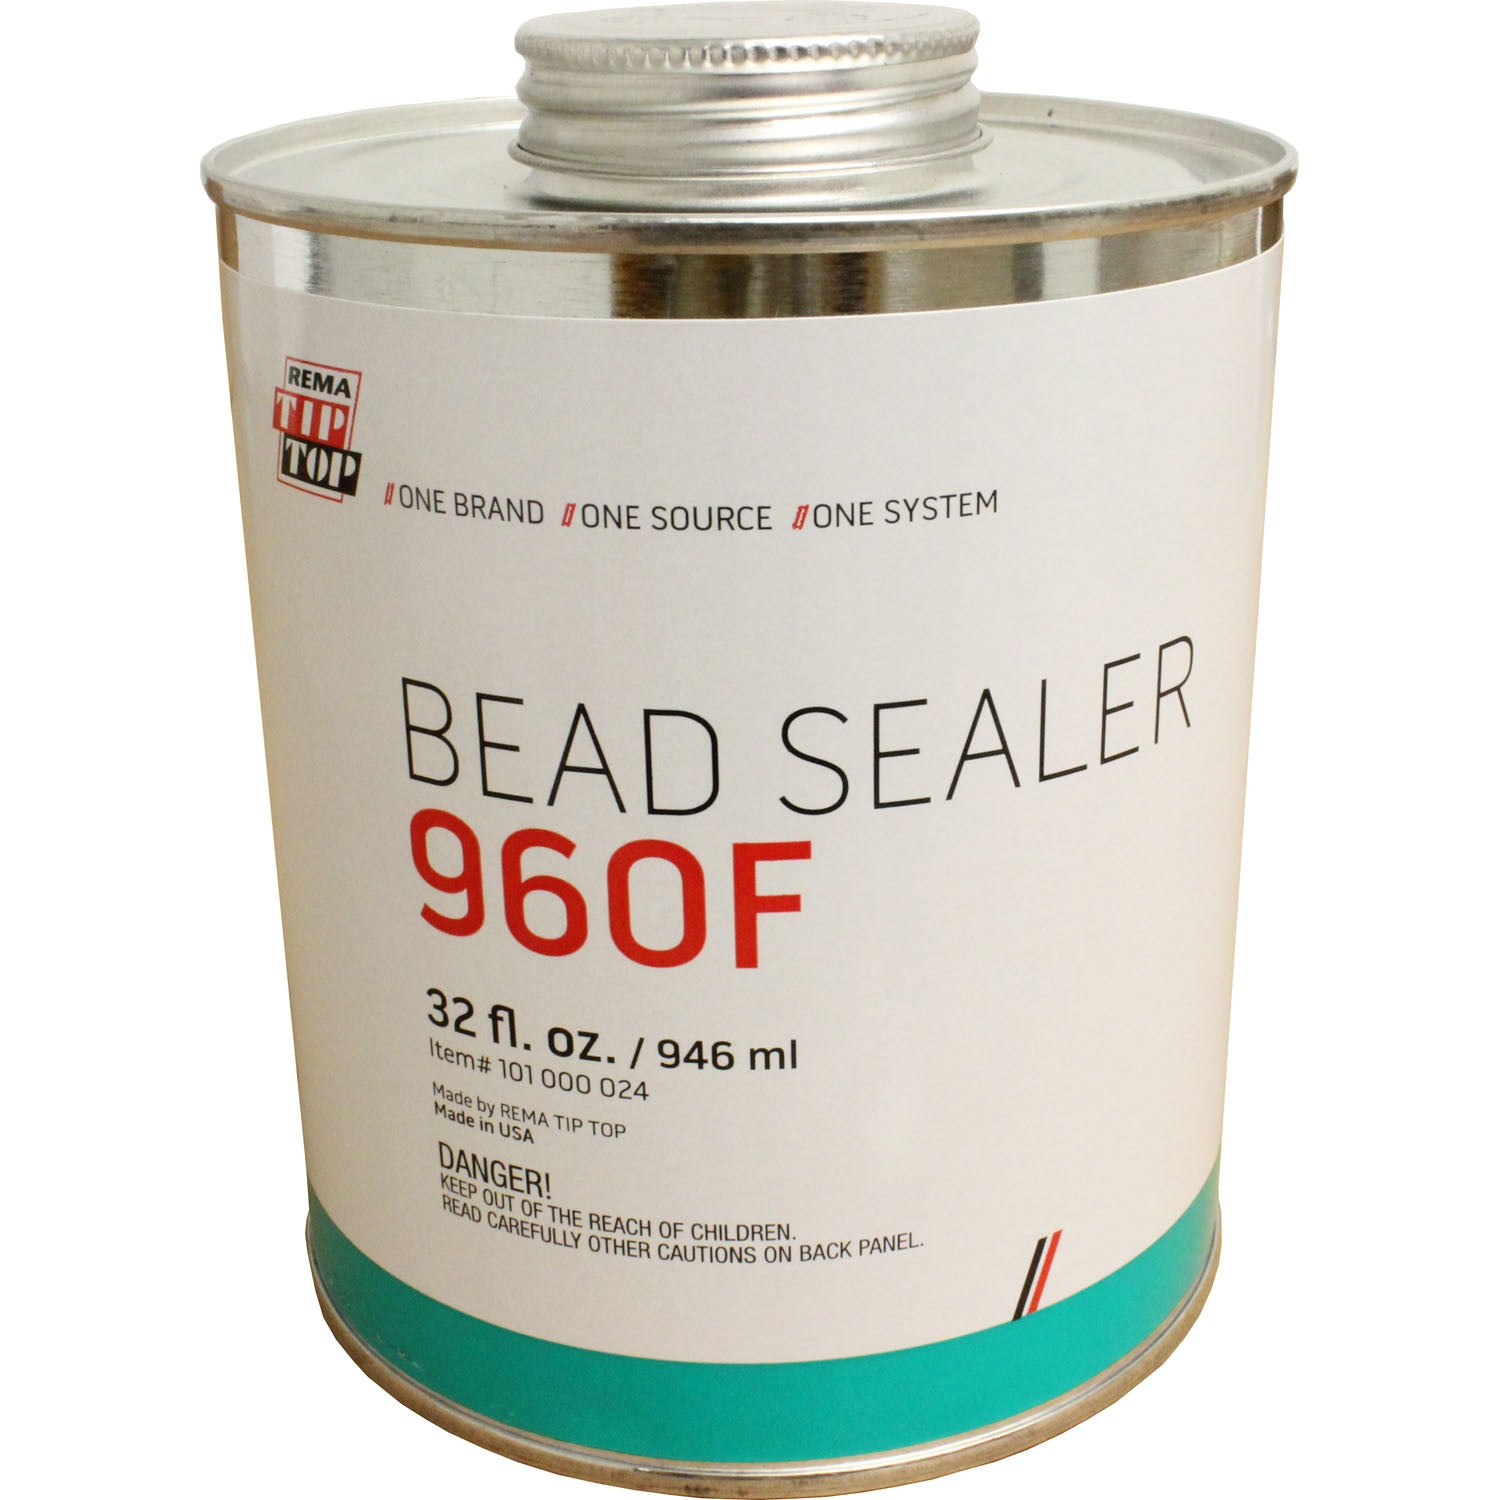 Two cans of REMA 960F Tire Bead Sealer, Rim Sealer 32 fl oz can